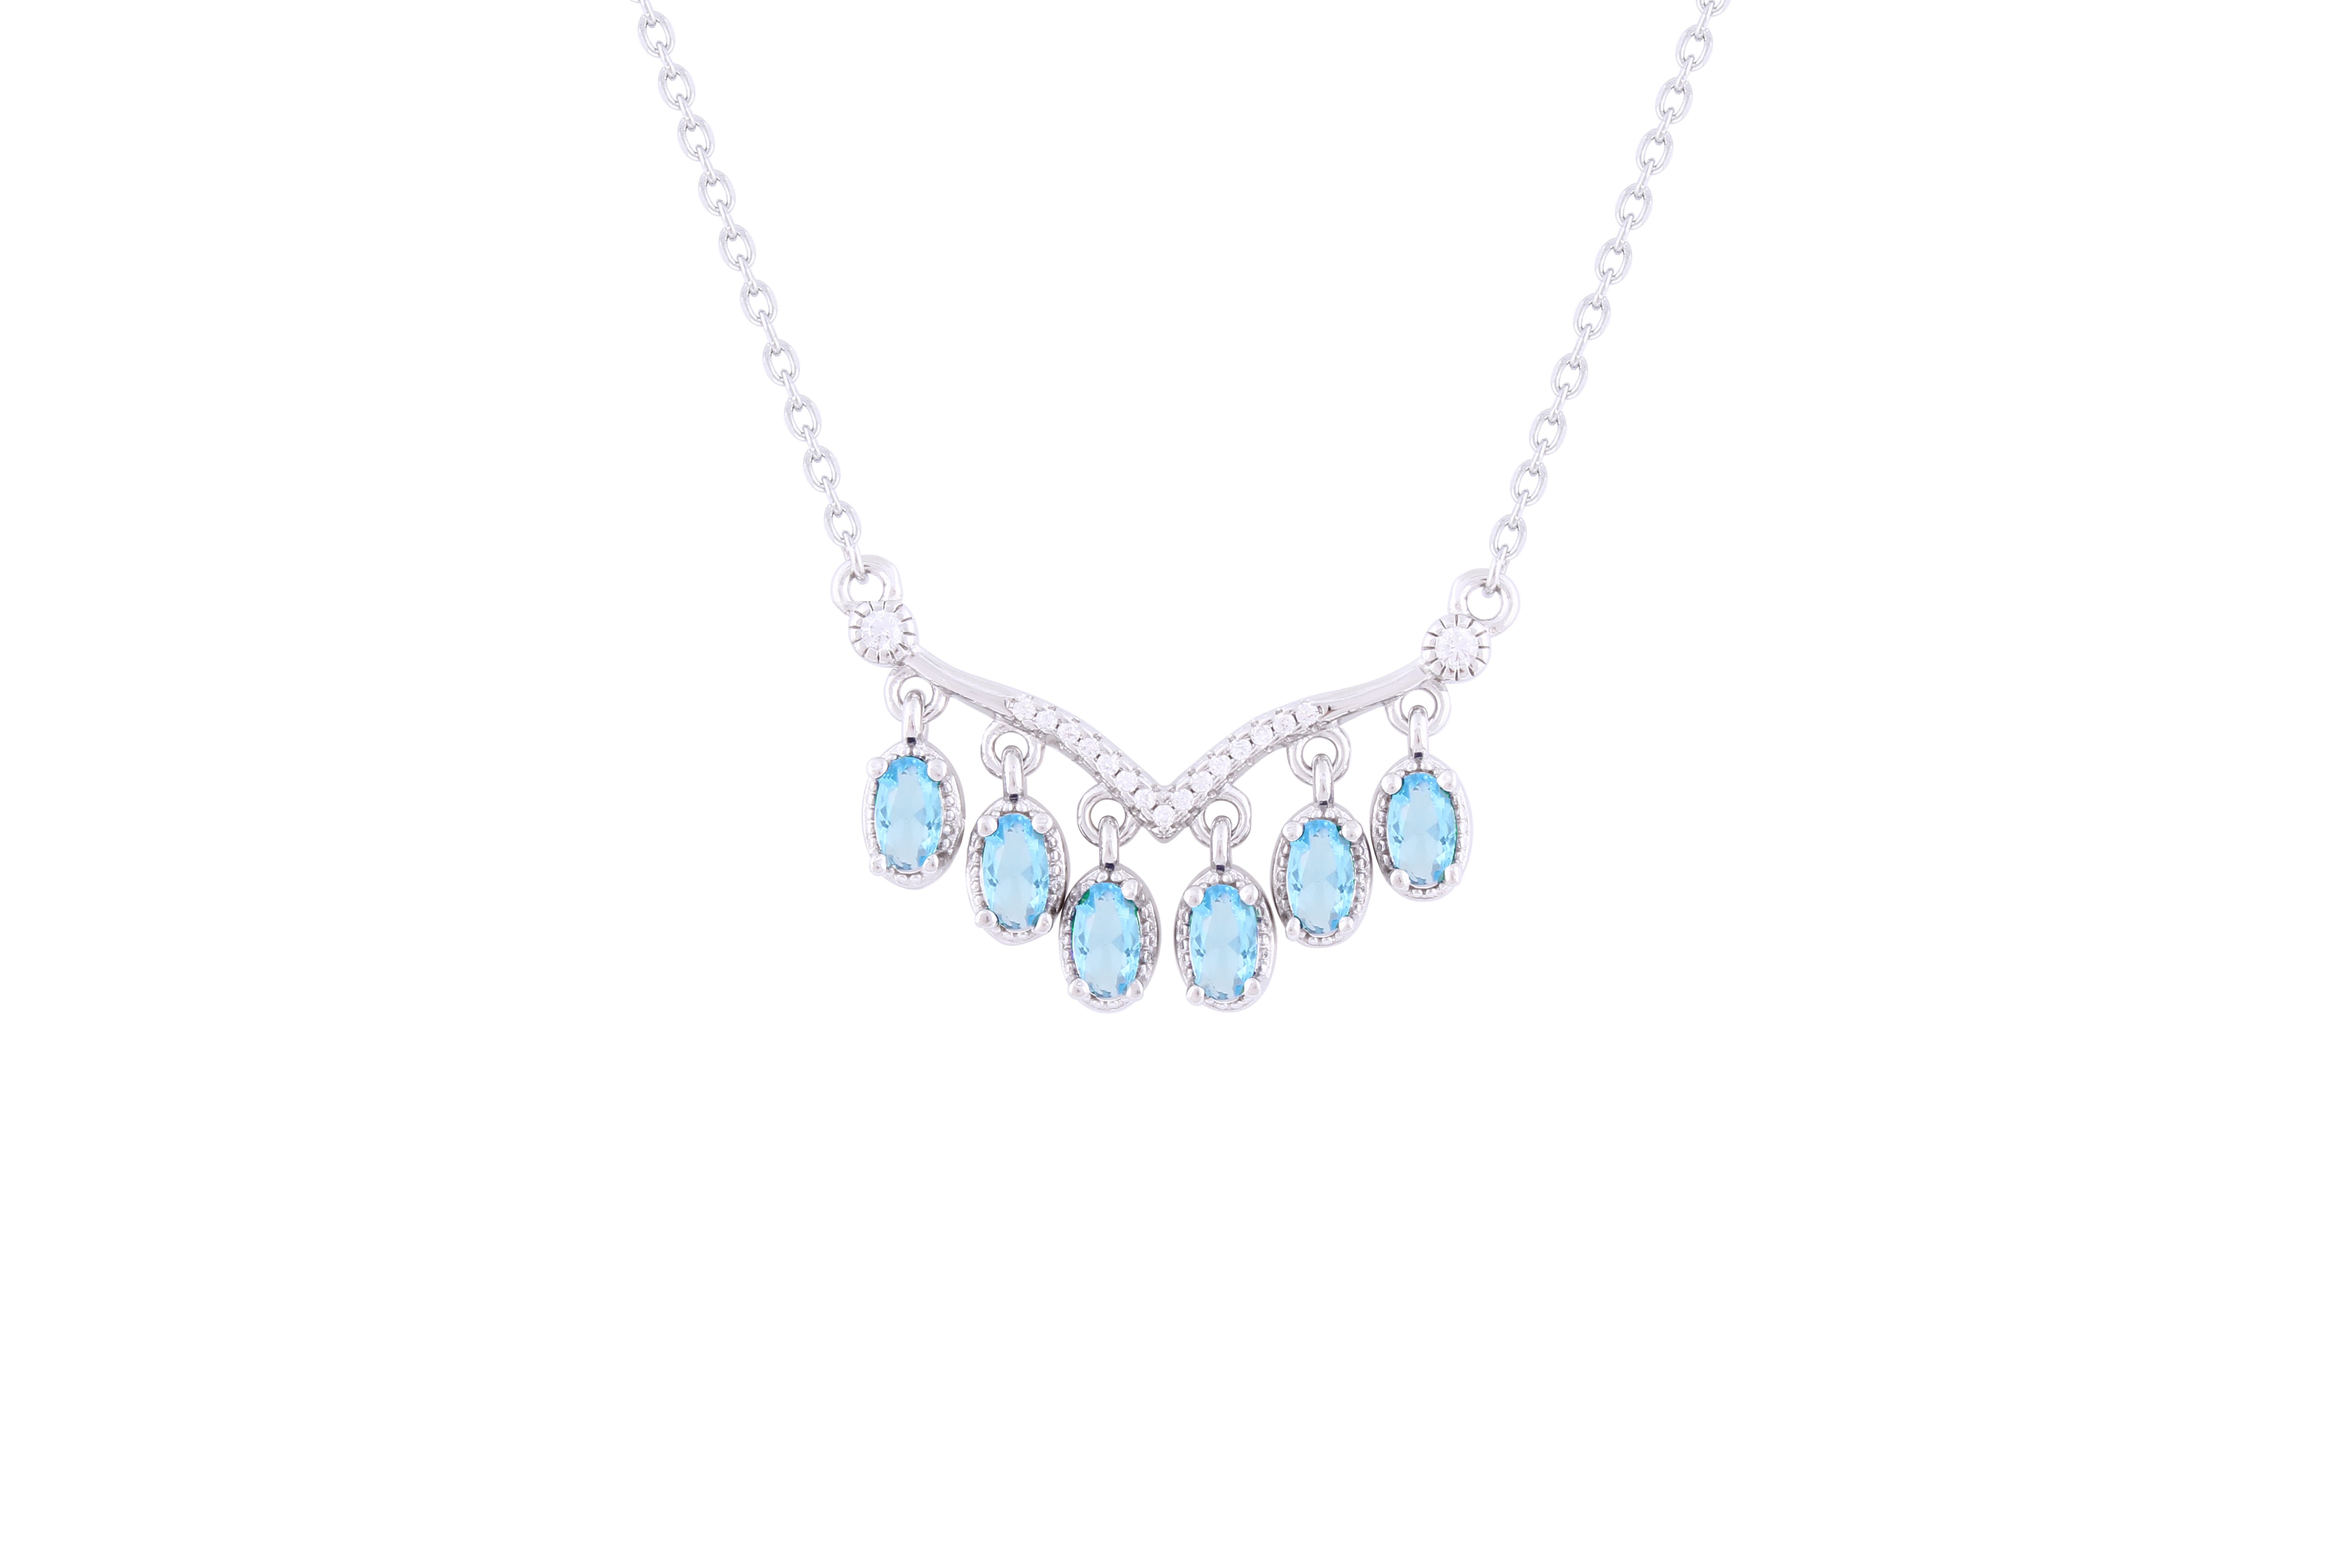 Asfour 925 Sterling Silver Necklace With Aquamarine Oval Cut Stones NR0495-M